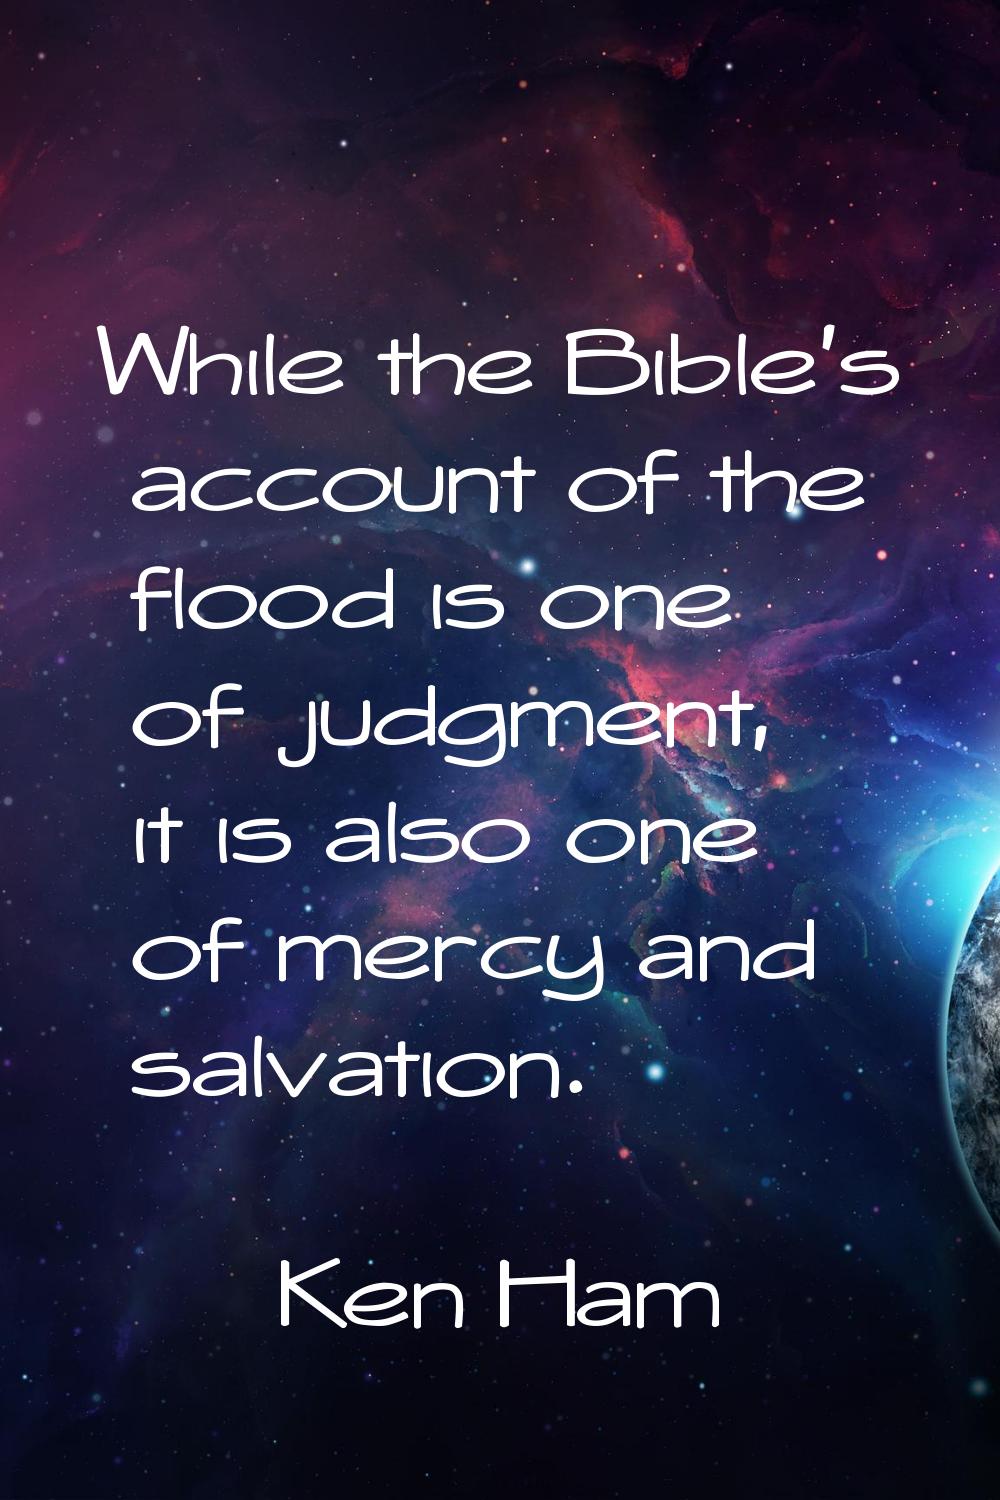 While the Bible's account of the flood is one of judgment, it is also one of mercy and salvation.